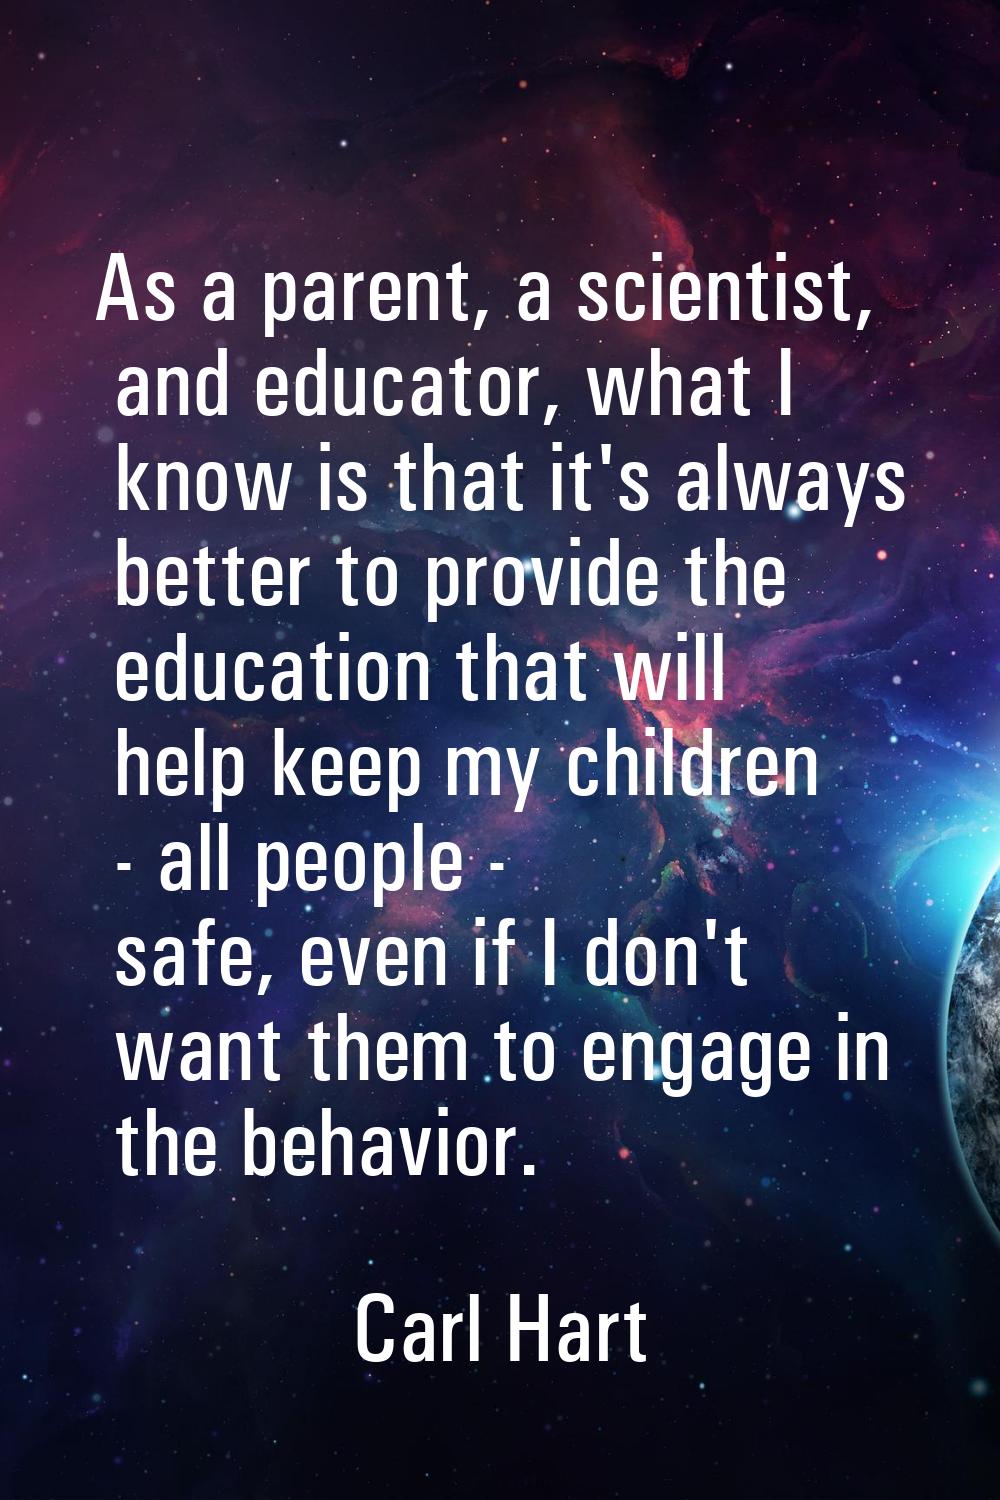 As a parent, a scientist, and educator, what I know is that it's always better to provide the educa